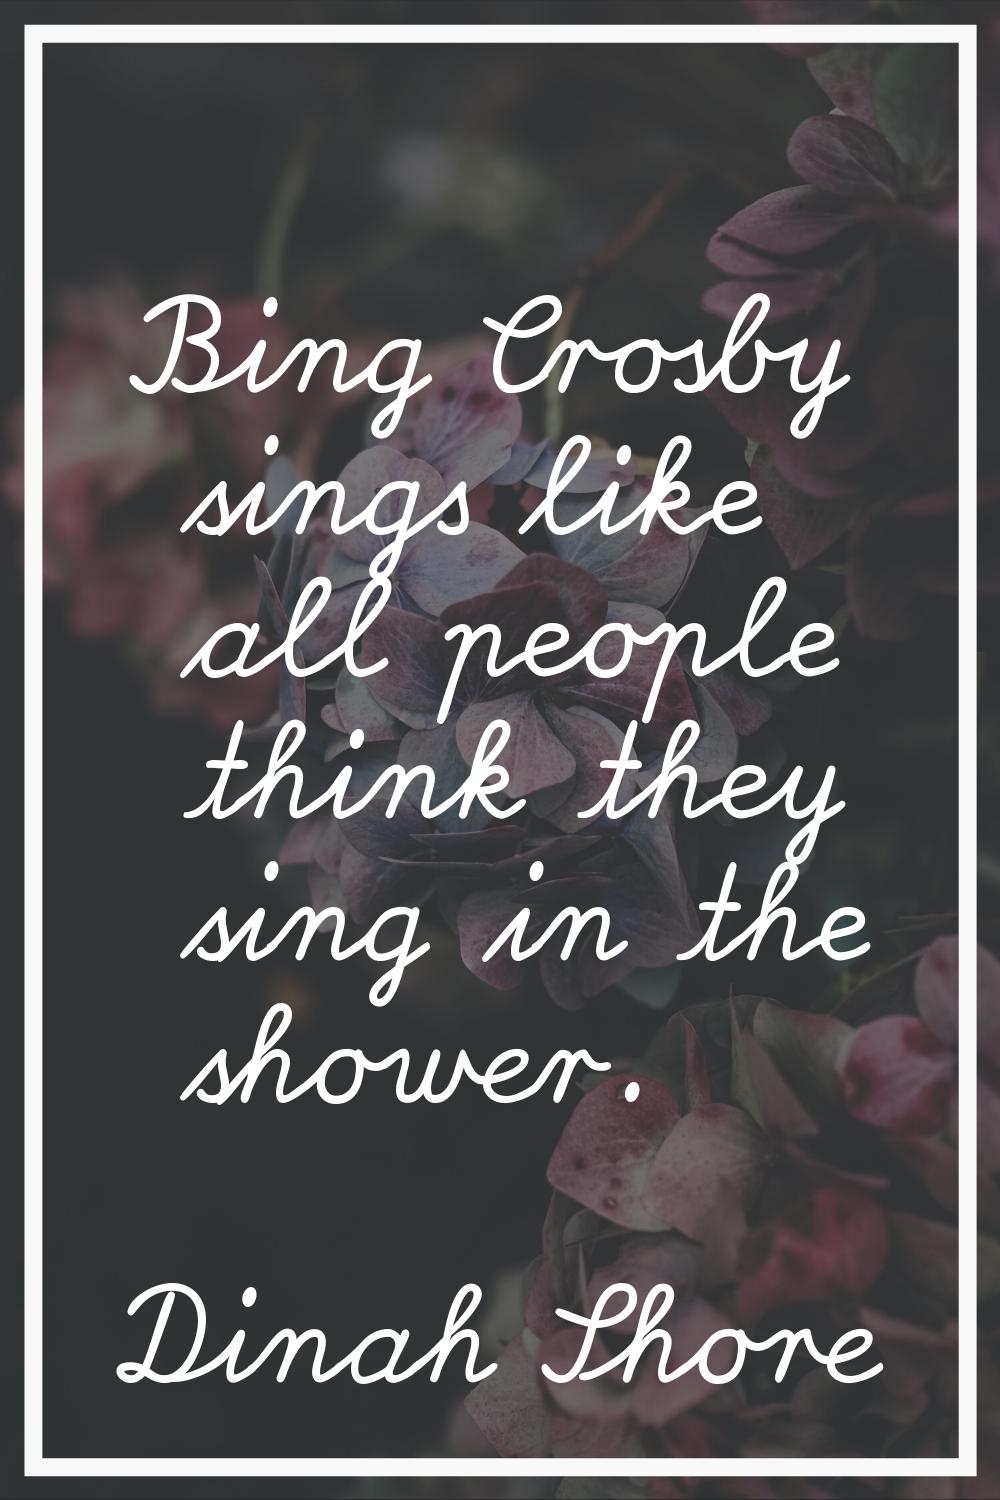 Bing Crosby sings like all people think they sing in the shower.